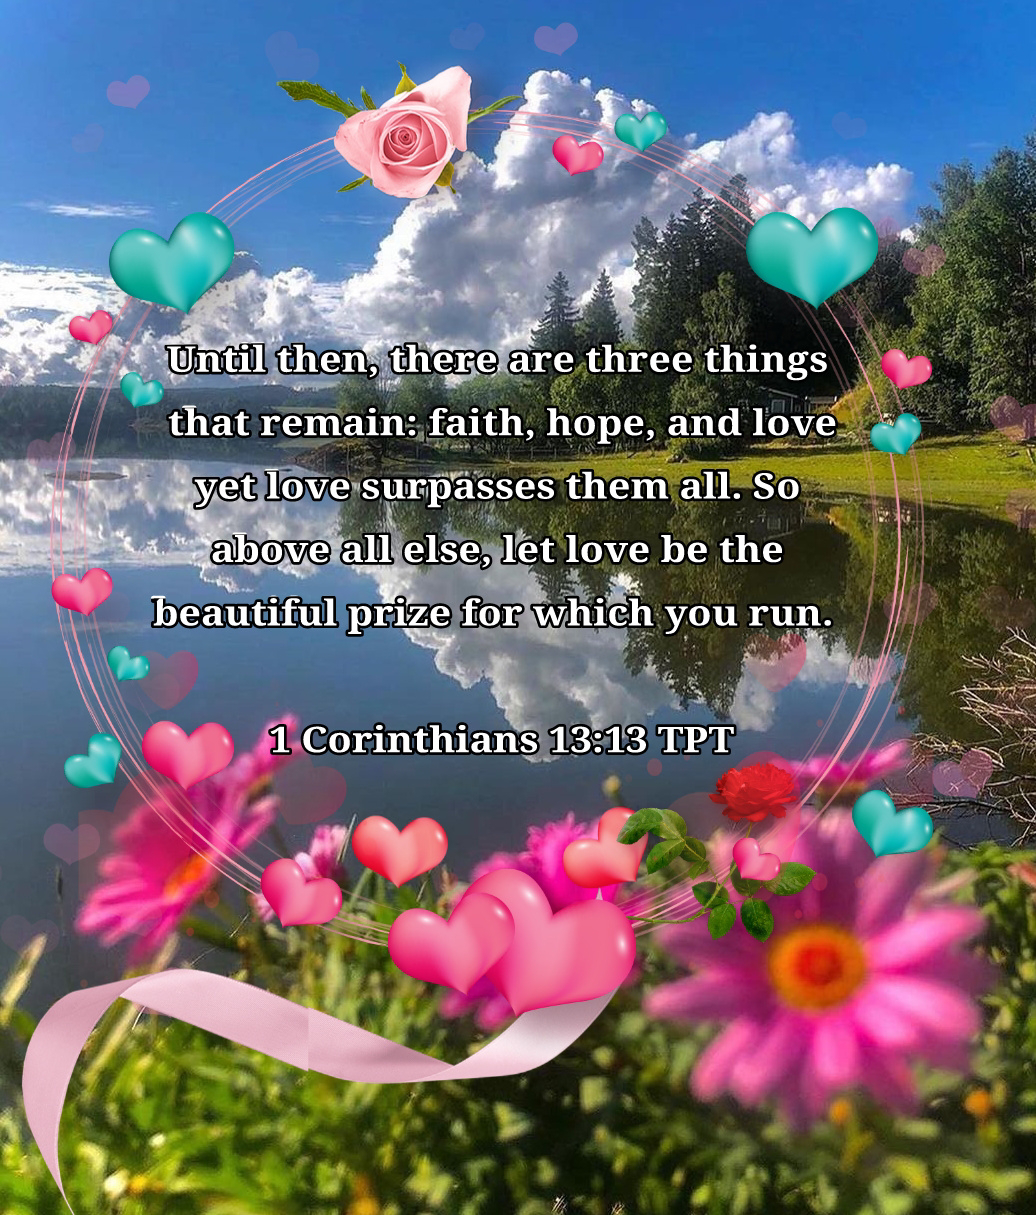 Until then, there are three things that remain: faith, hope, and love—yet love surpasses them all. So above all else, let love be the beautiful prize for which you run. 1 Corinthians 13:13 TPT